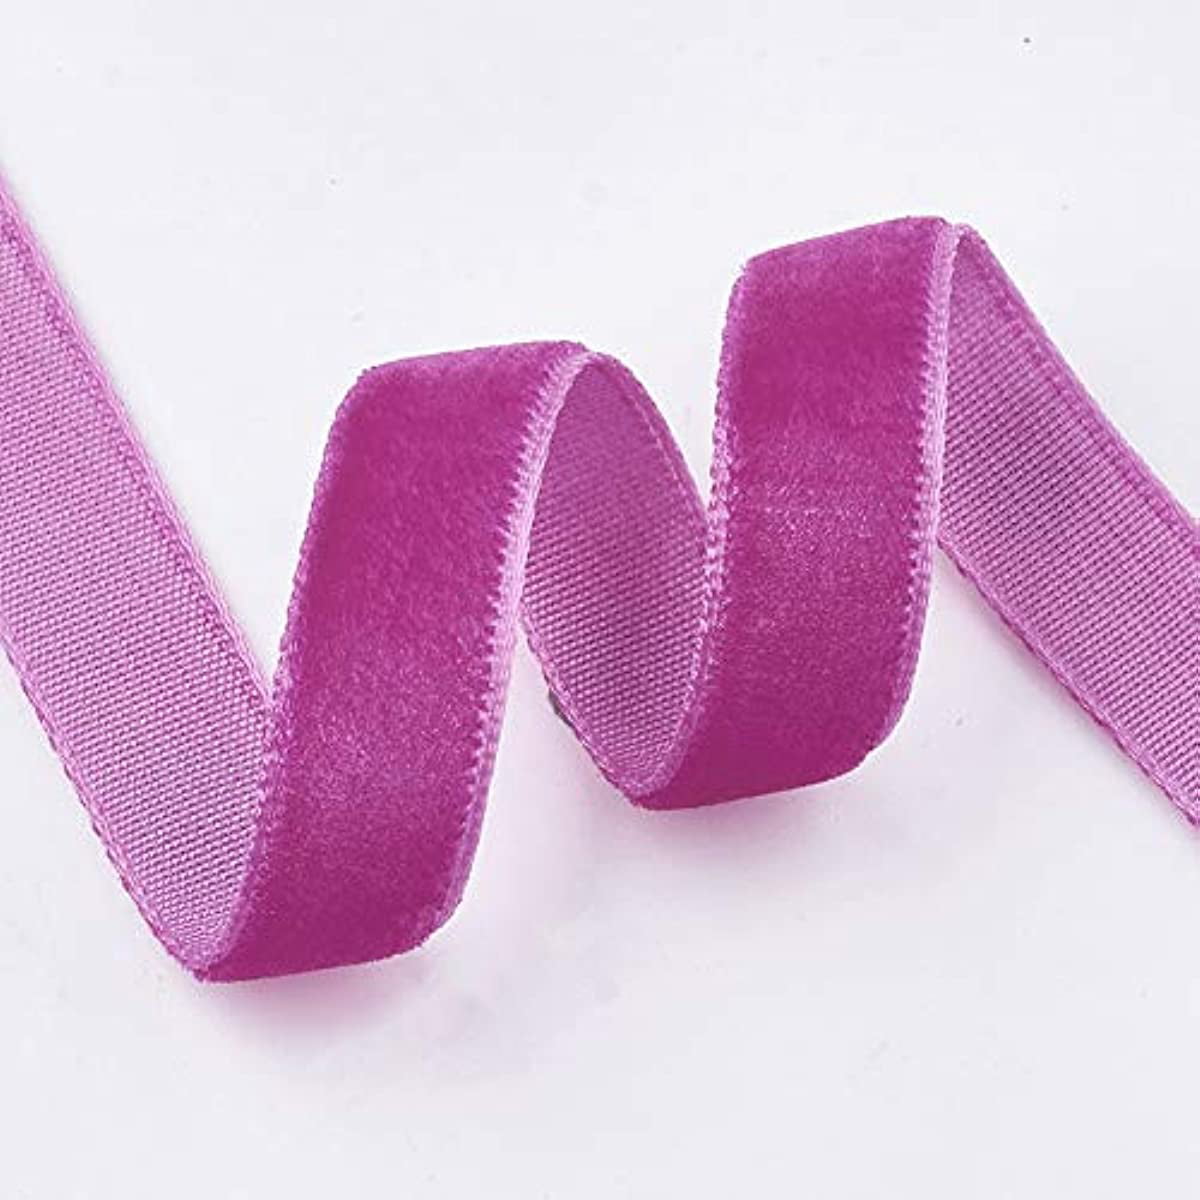  Abbaoww 50 Yards Vintage Hot Pink Velvet Ribbon 3/8 Inch for  Gift Wrapping Wedding Decoration DIY Project (Hot Pink) : Health & Household